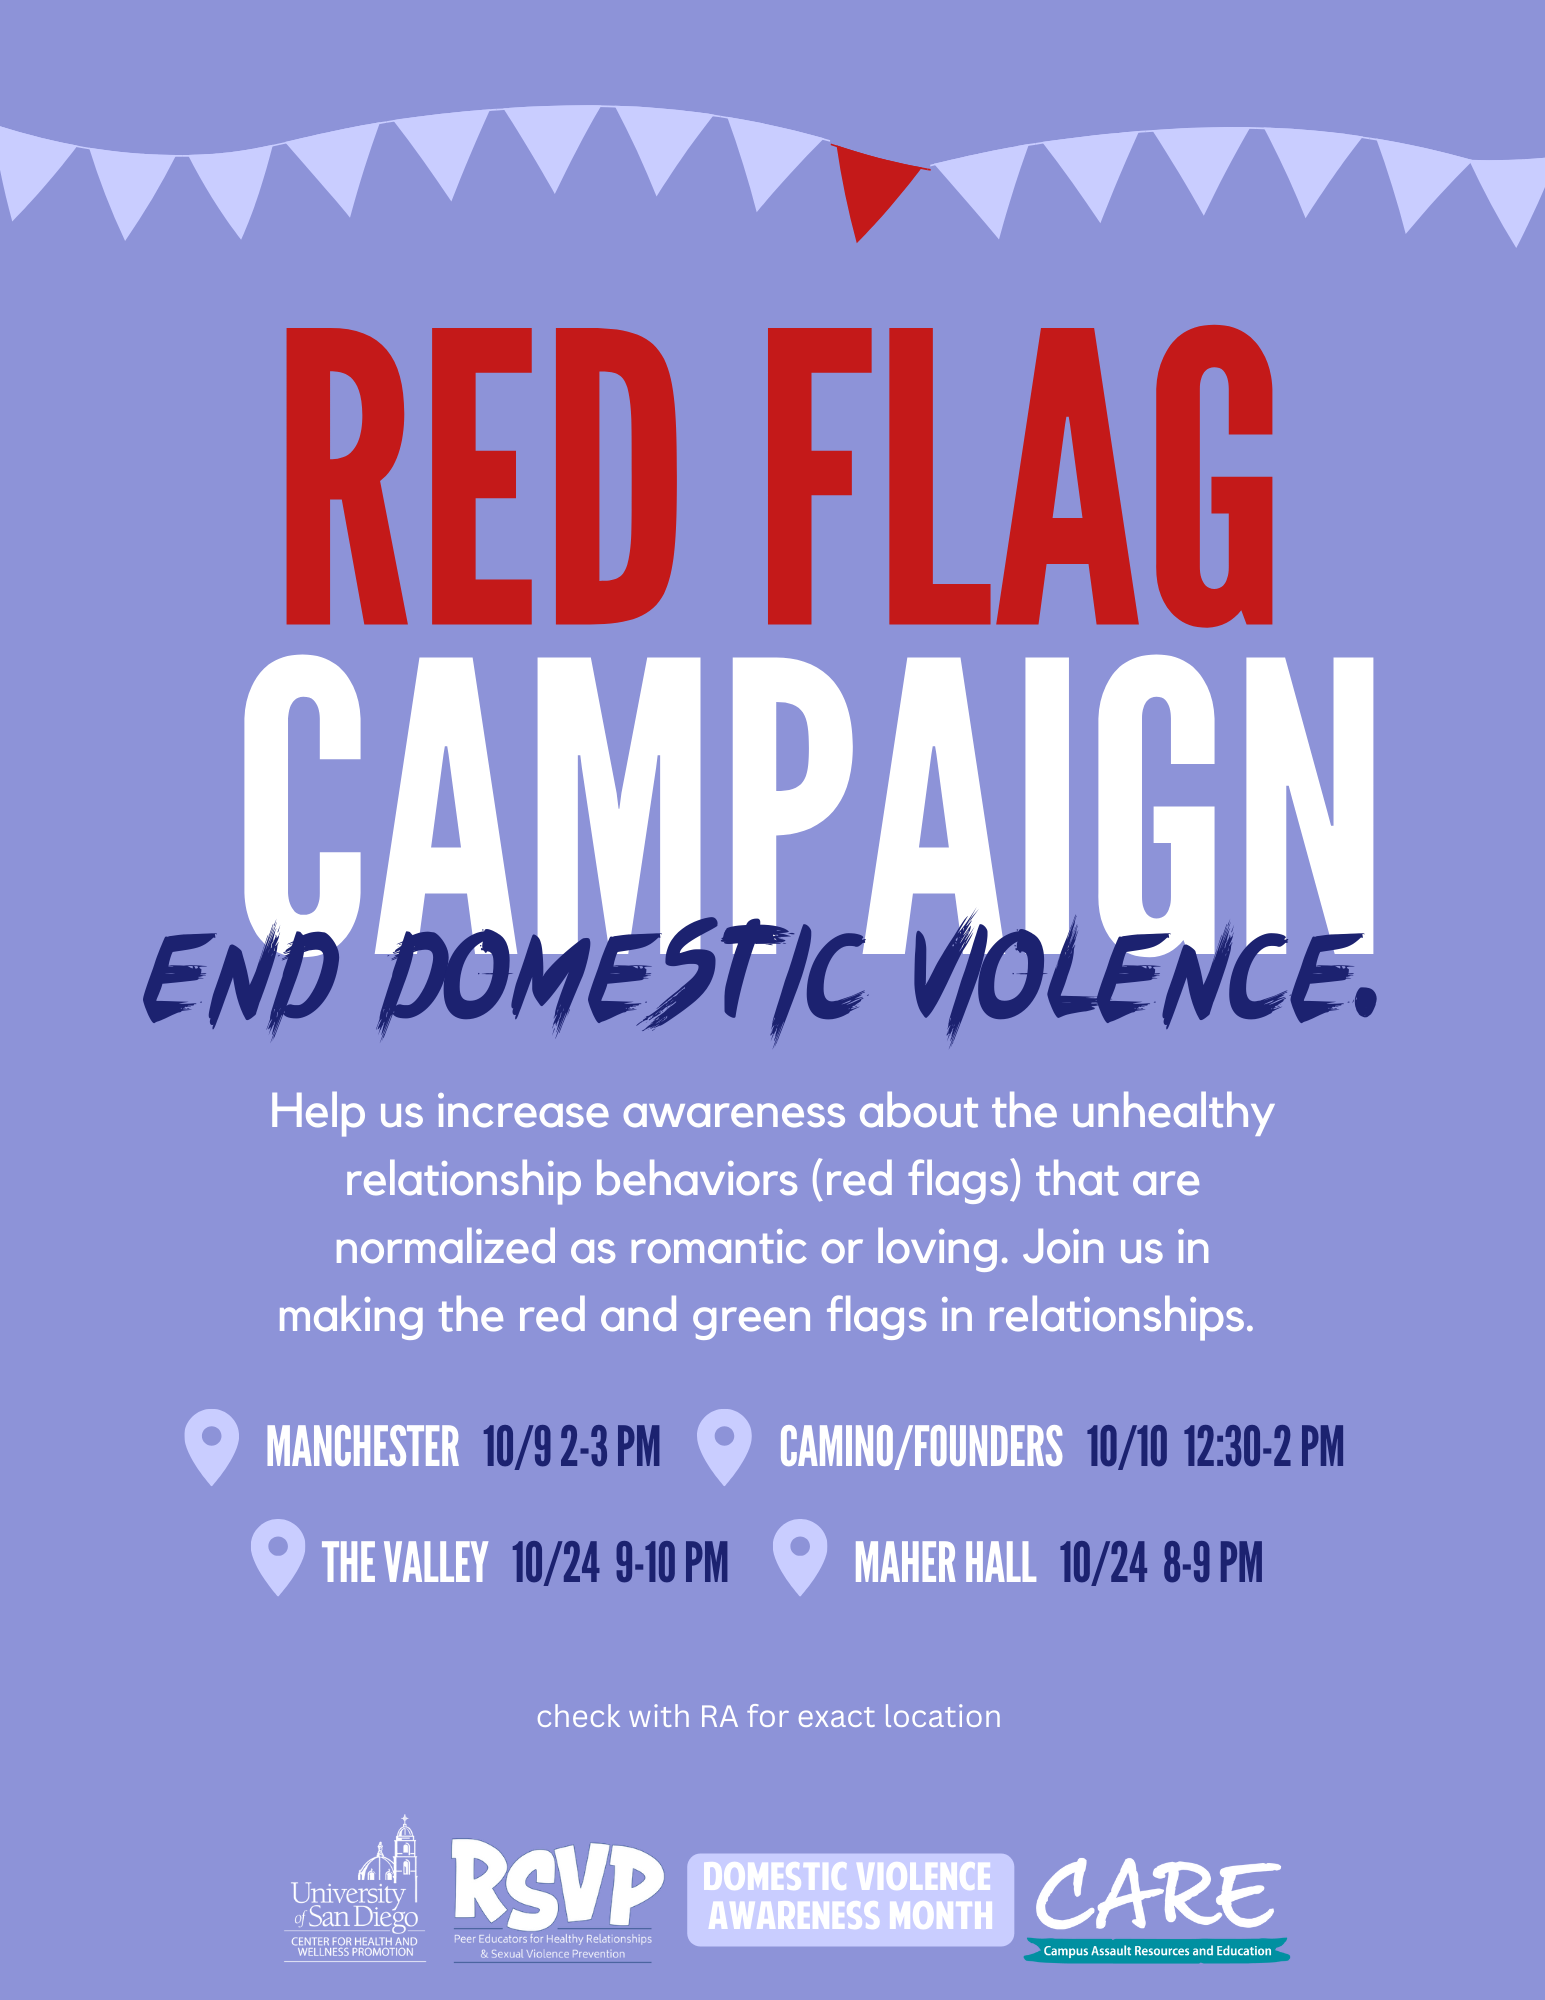 On a purple background, the following text is printed in white writing: "Red Flag Campaign; End Domestic Violence" ; "Help us increase awareness about the unhealthy relationship behaviors (red flags) that are normalized as romantic or loving. Join us in making the red and green flags in relationships." ; "MANCHESTER 10/9 2-3 PM ; CAMINO/FOUNDERS 10/10 12:30-2 PM ; THE VALLEY 10/24 9-410 PM ; MAHER HALL 10/24 8-9 PM" ; "check with RA for exact location". The following logos are lined at the bottom of the page: USD CHWP, RSVP, DVAM, Care. 